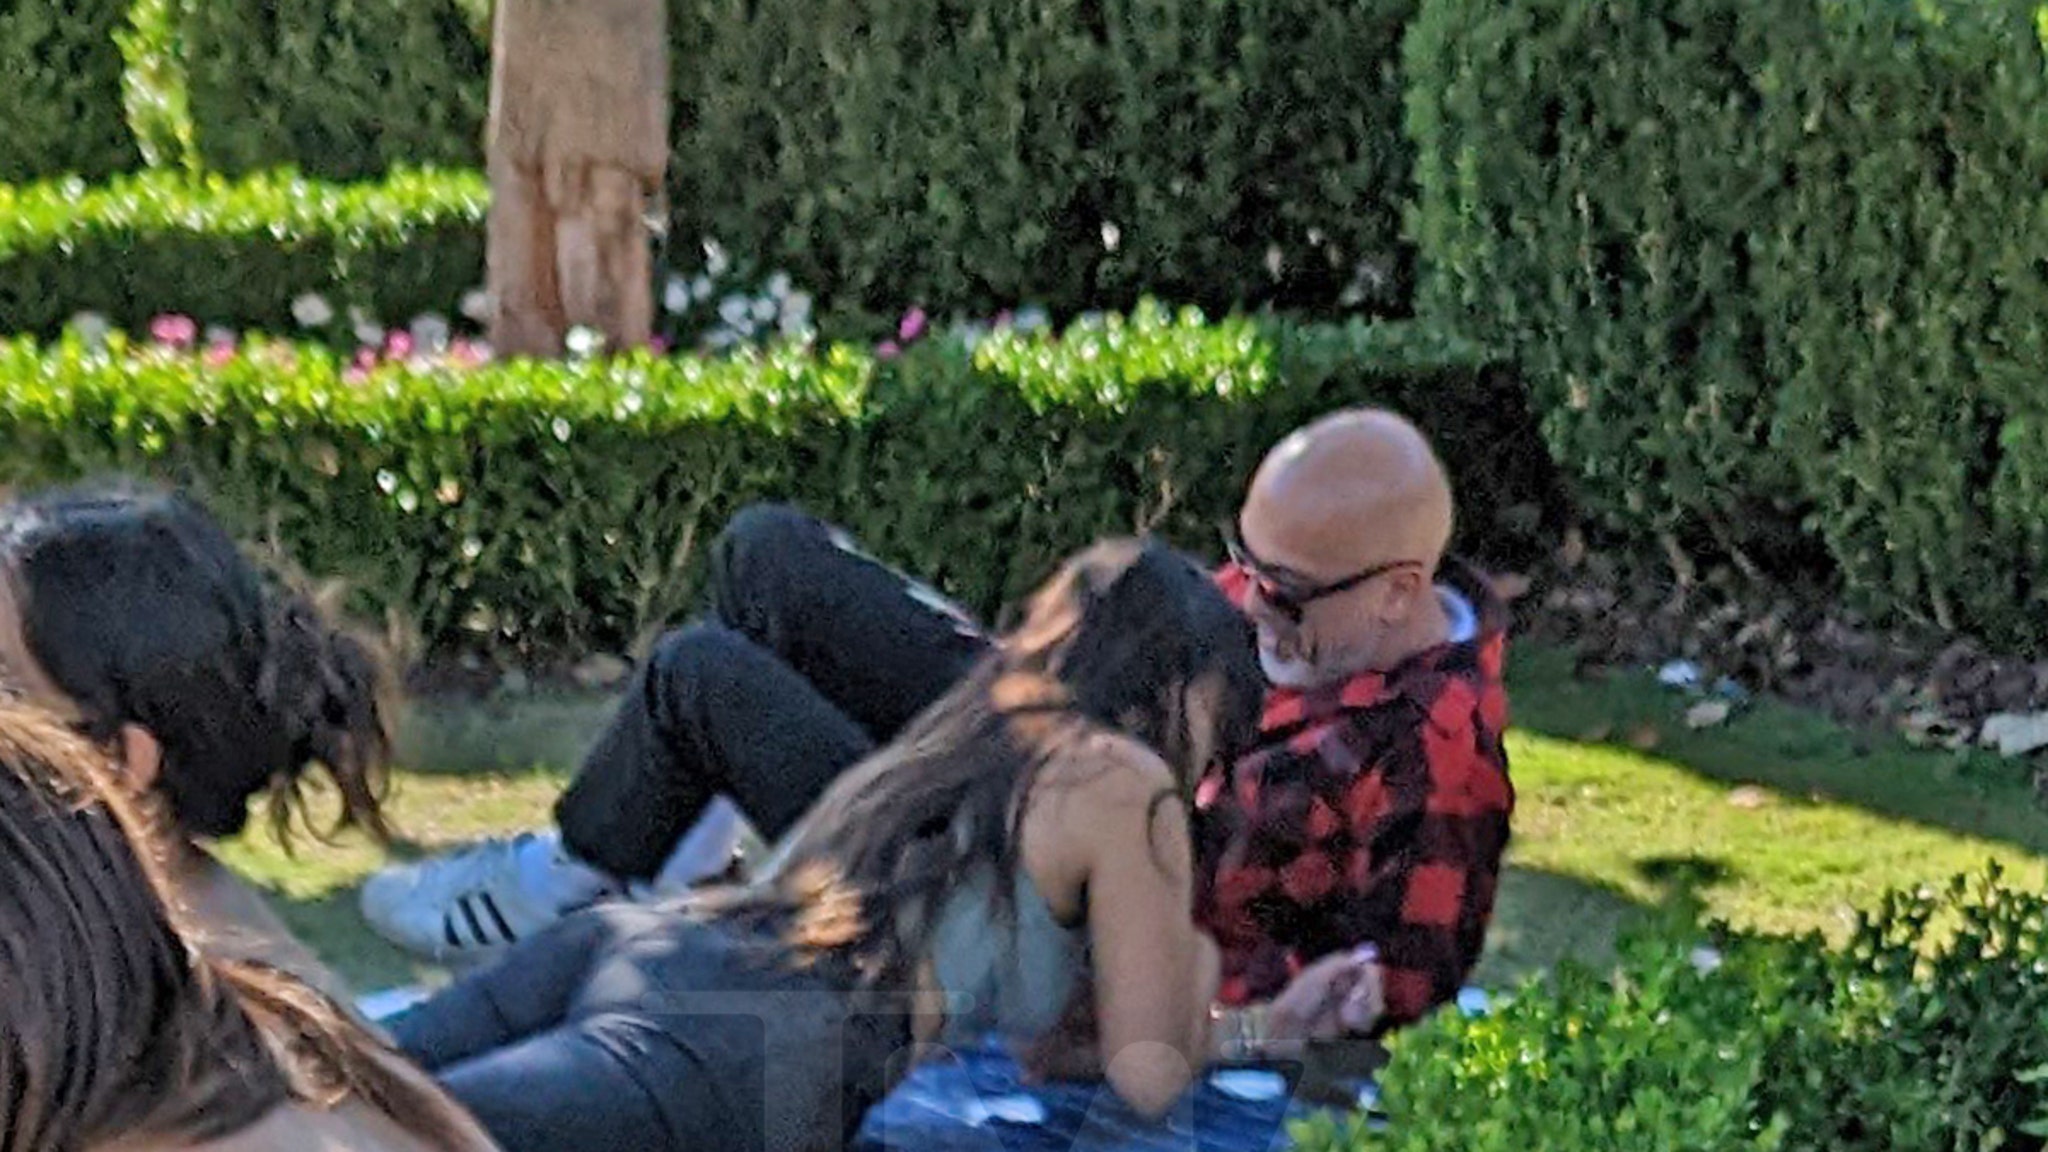 Jo Koy Having Picnic With Mystery Woman Months After Chelsea Handler Split thumbnail